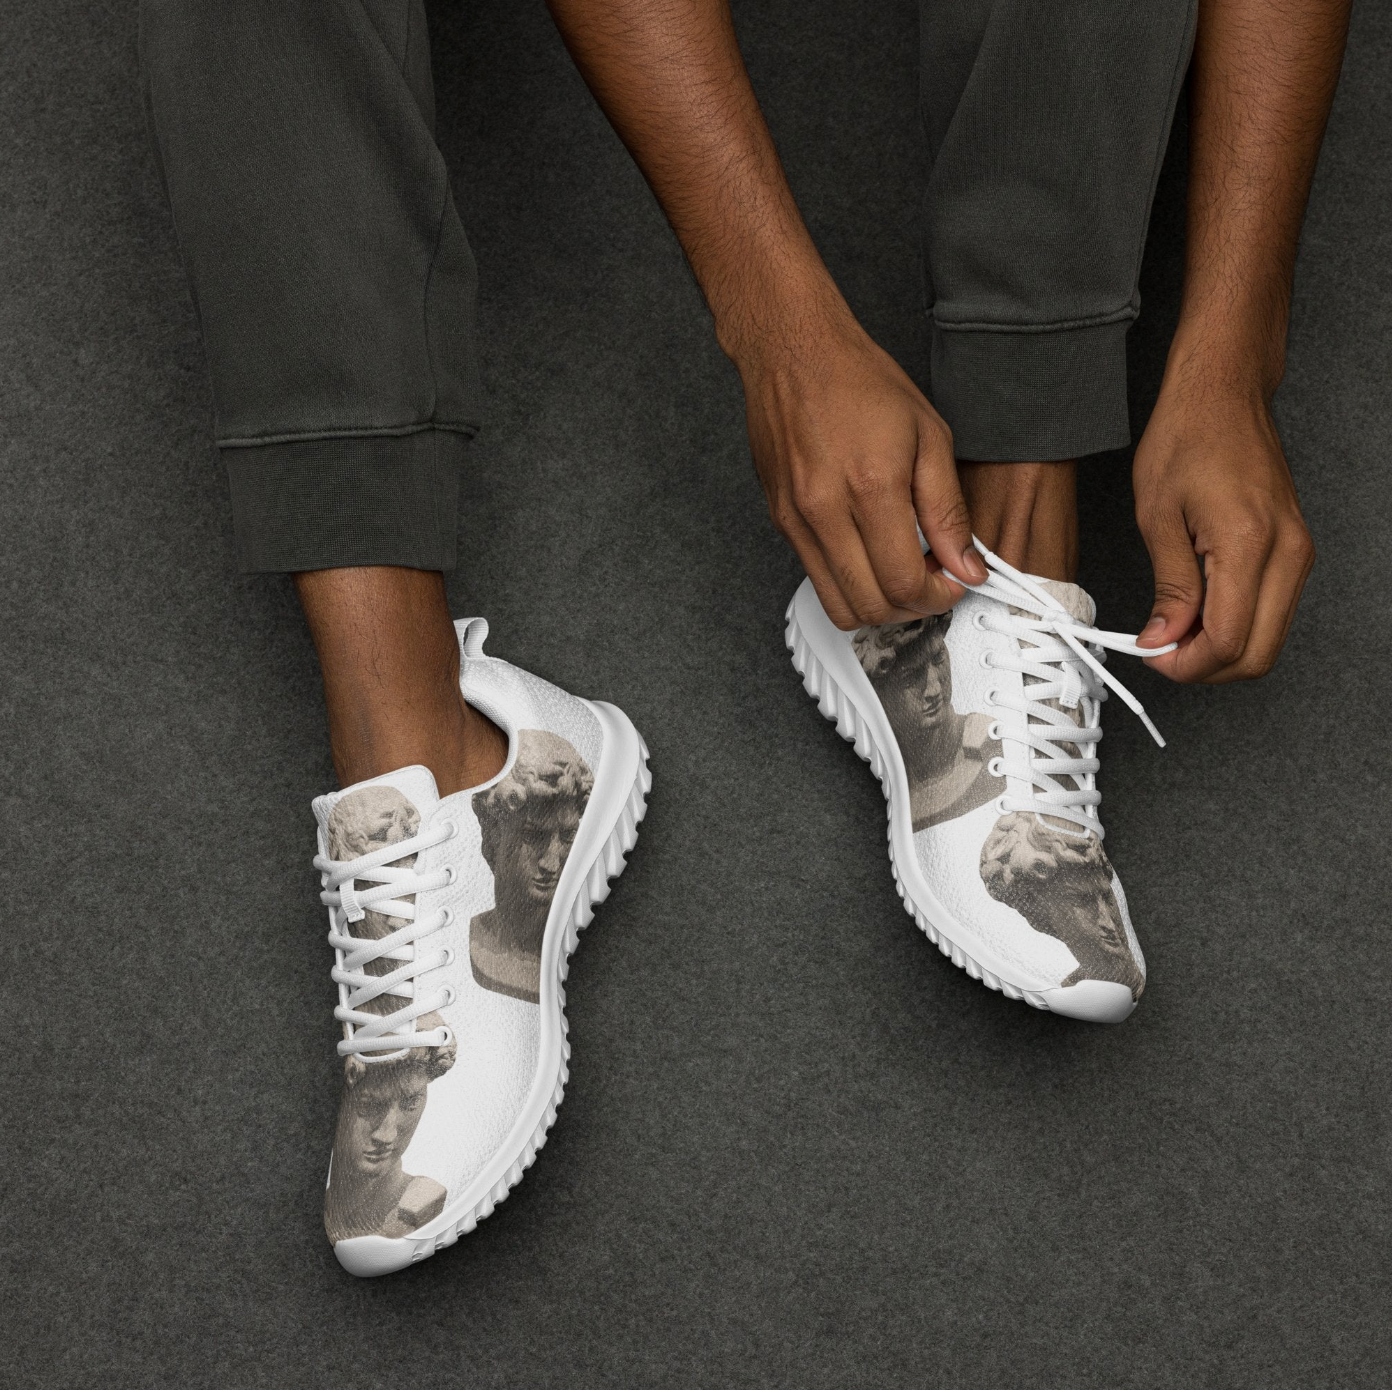 Men’s athletic runners by NK | Unisex | Breathable